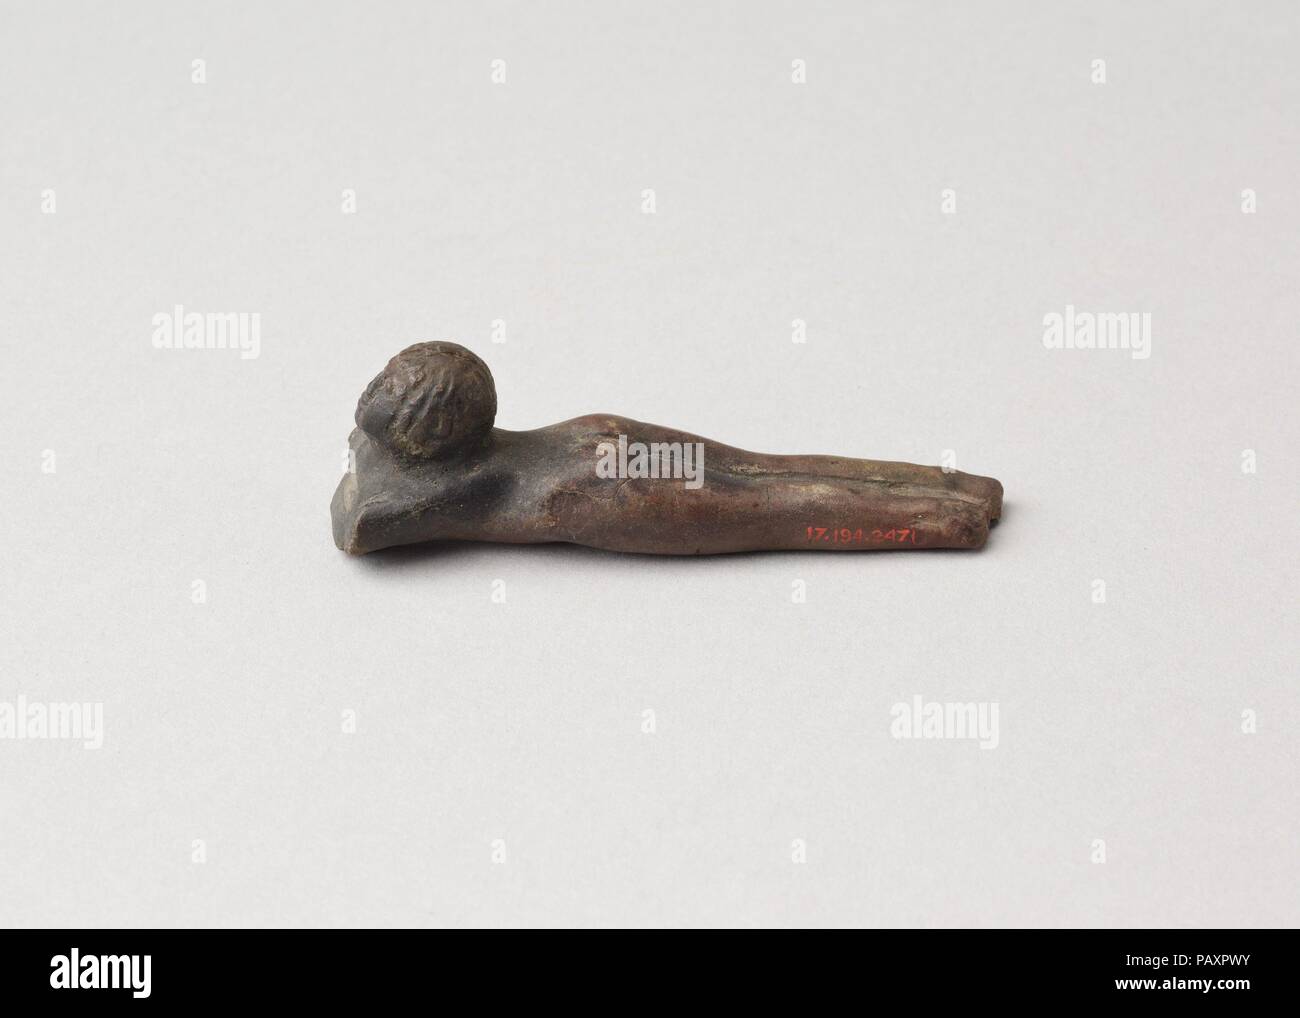 Handle from a cosmetic spoon. Dimensions: L. 6.4 cm. Dynasty: Dynasty 21-25. Date: ca. 1070-664 B.C.. Museum: Metropolitan Museum of Art, New York, USA. Stock Photo